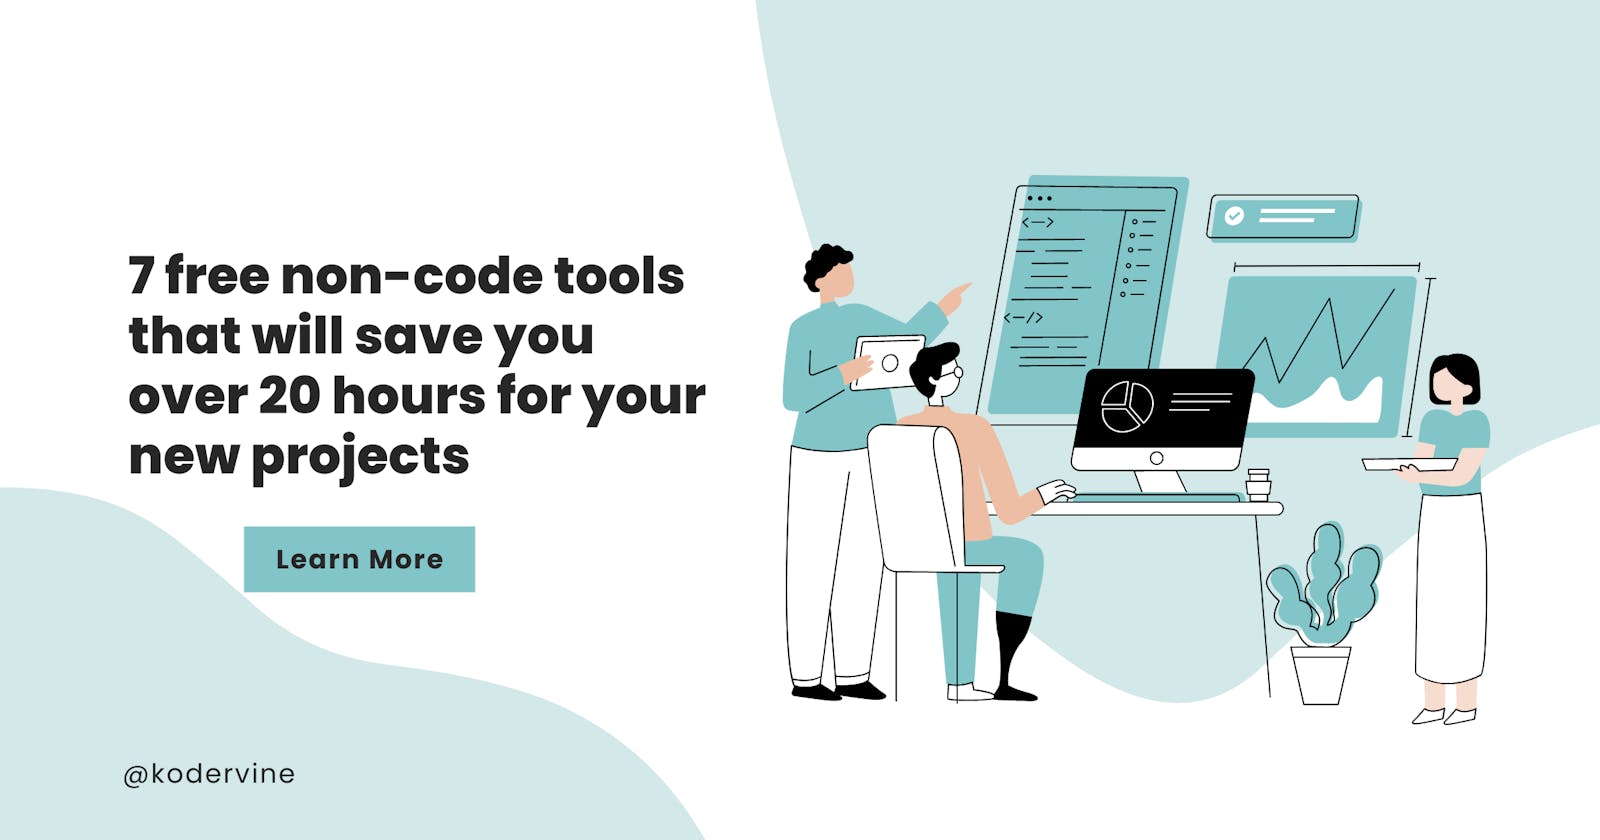 7 free non-code tools that will save you over 20 hours for your new projects